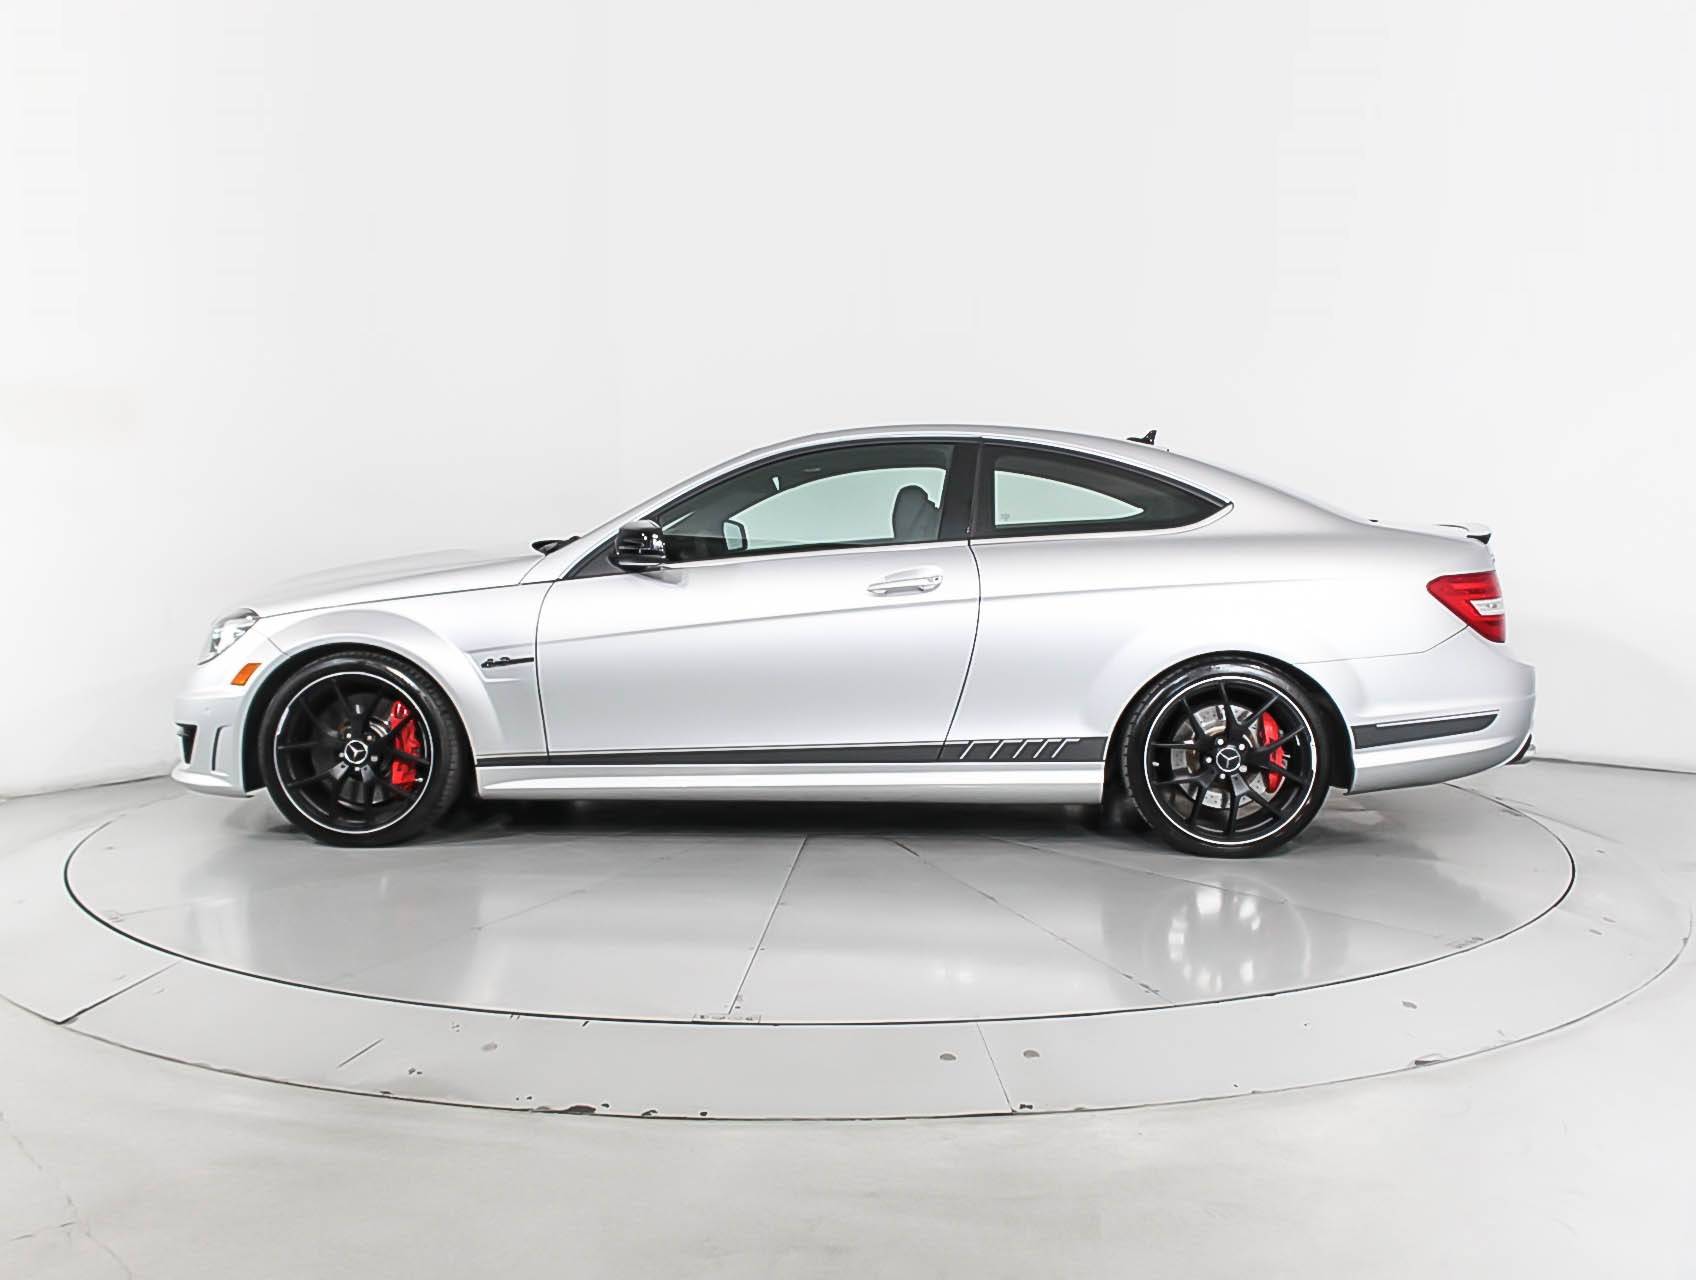 Used 15 Mercedes Benz C Class C63 Amg 507 Edition Coupe For Sale In Miami Fl 961 Florida Fine Cars